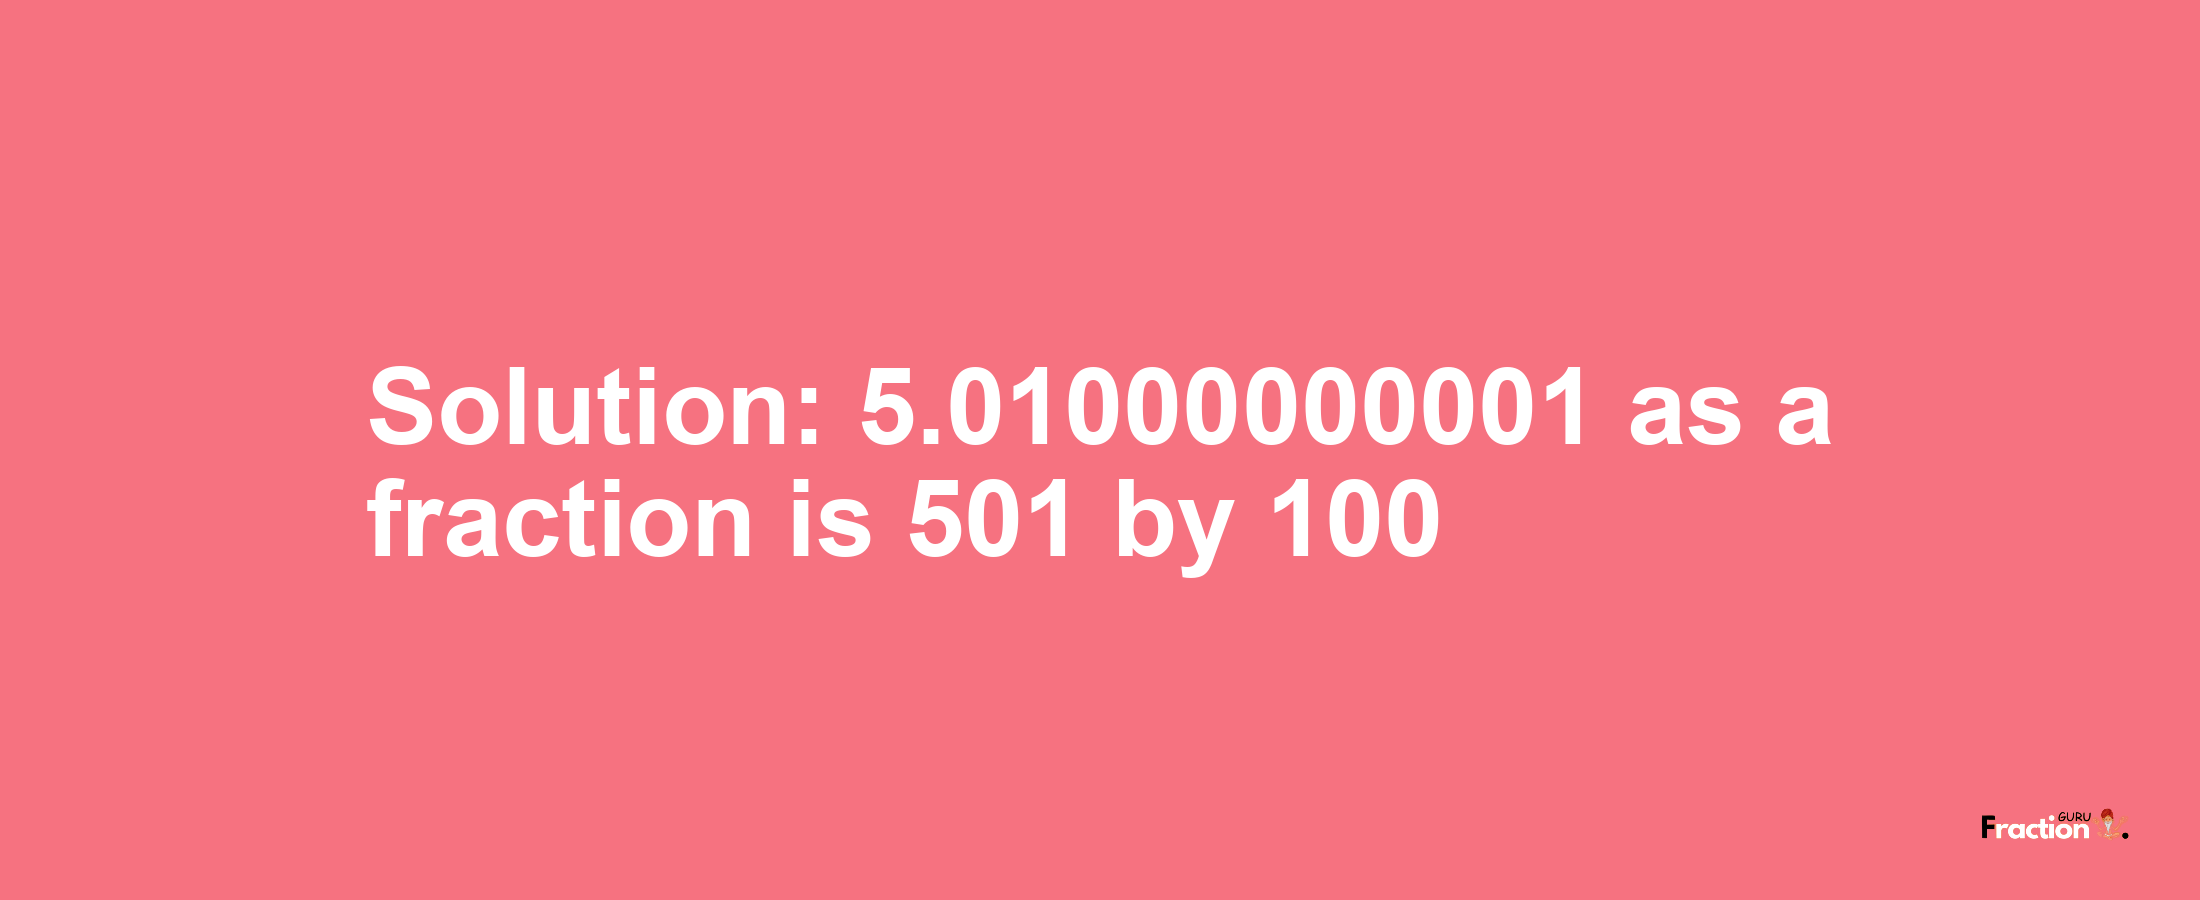 Solution:5.01000000001 as a fraction is 501/100